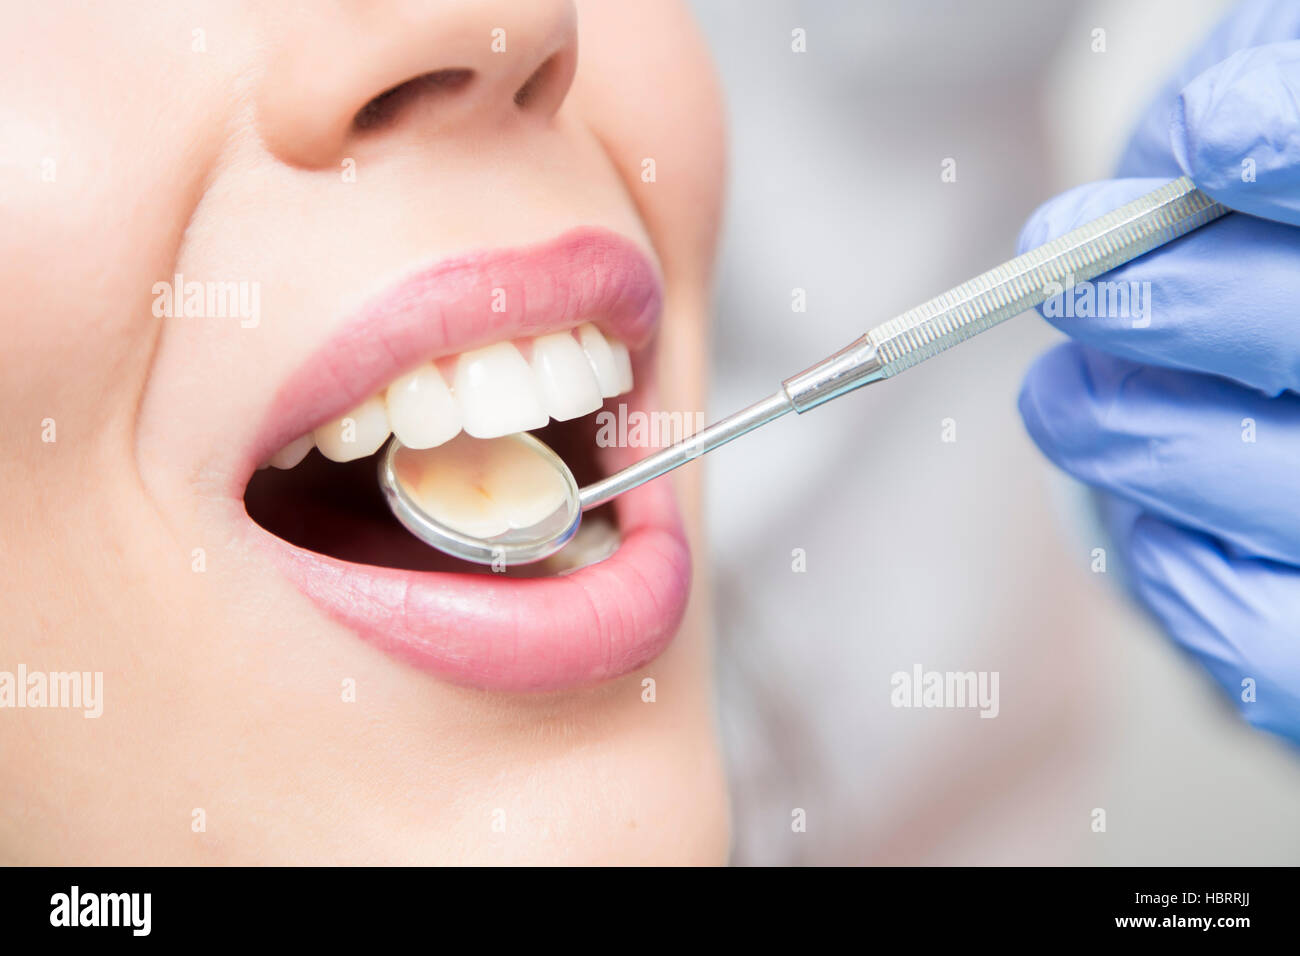 Close up view of open mouth during oral checkup at the dentist Stock Photo